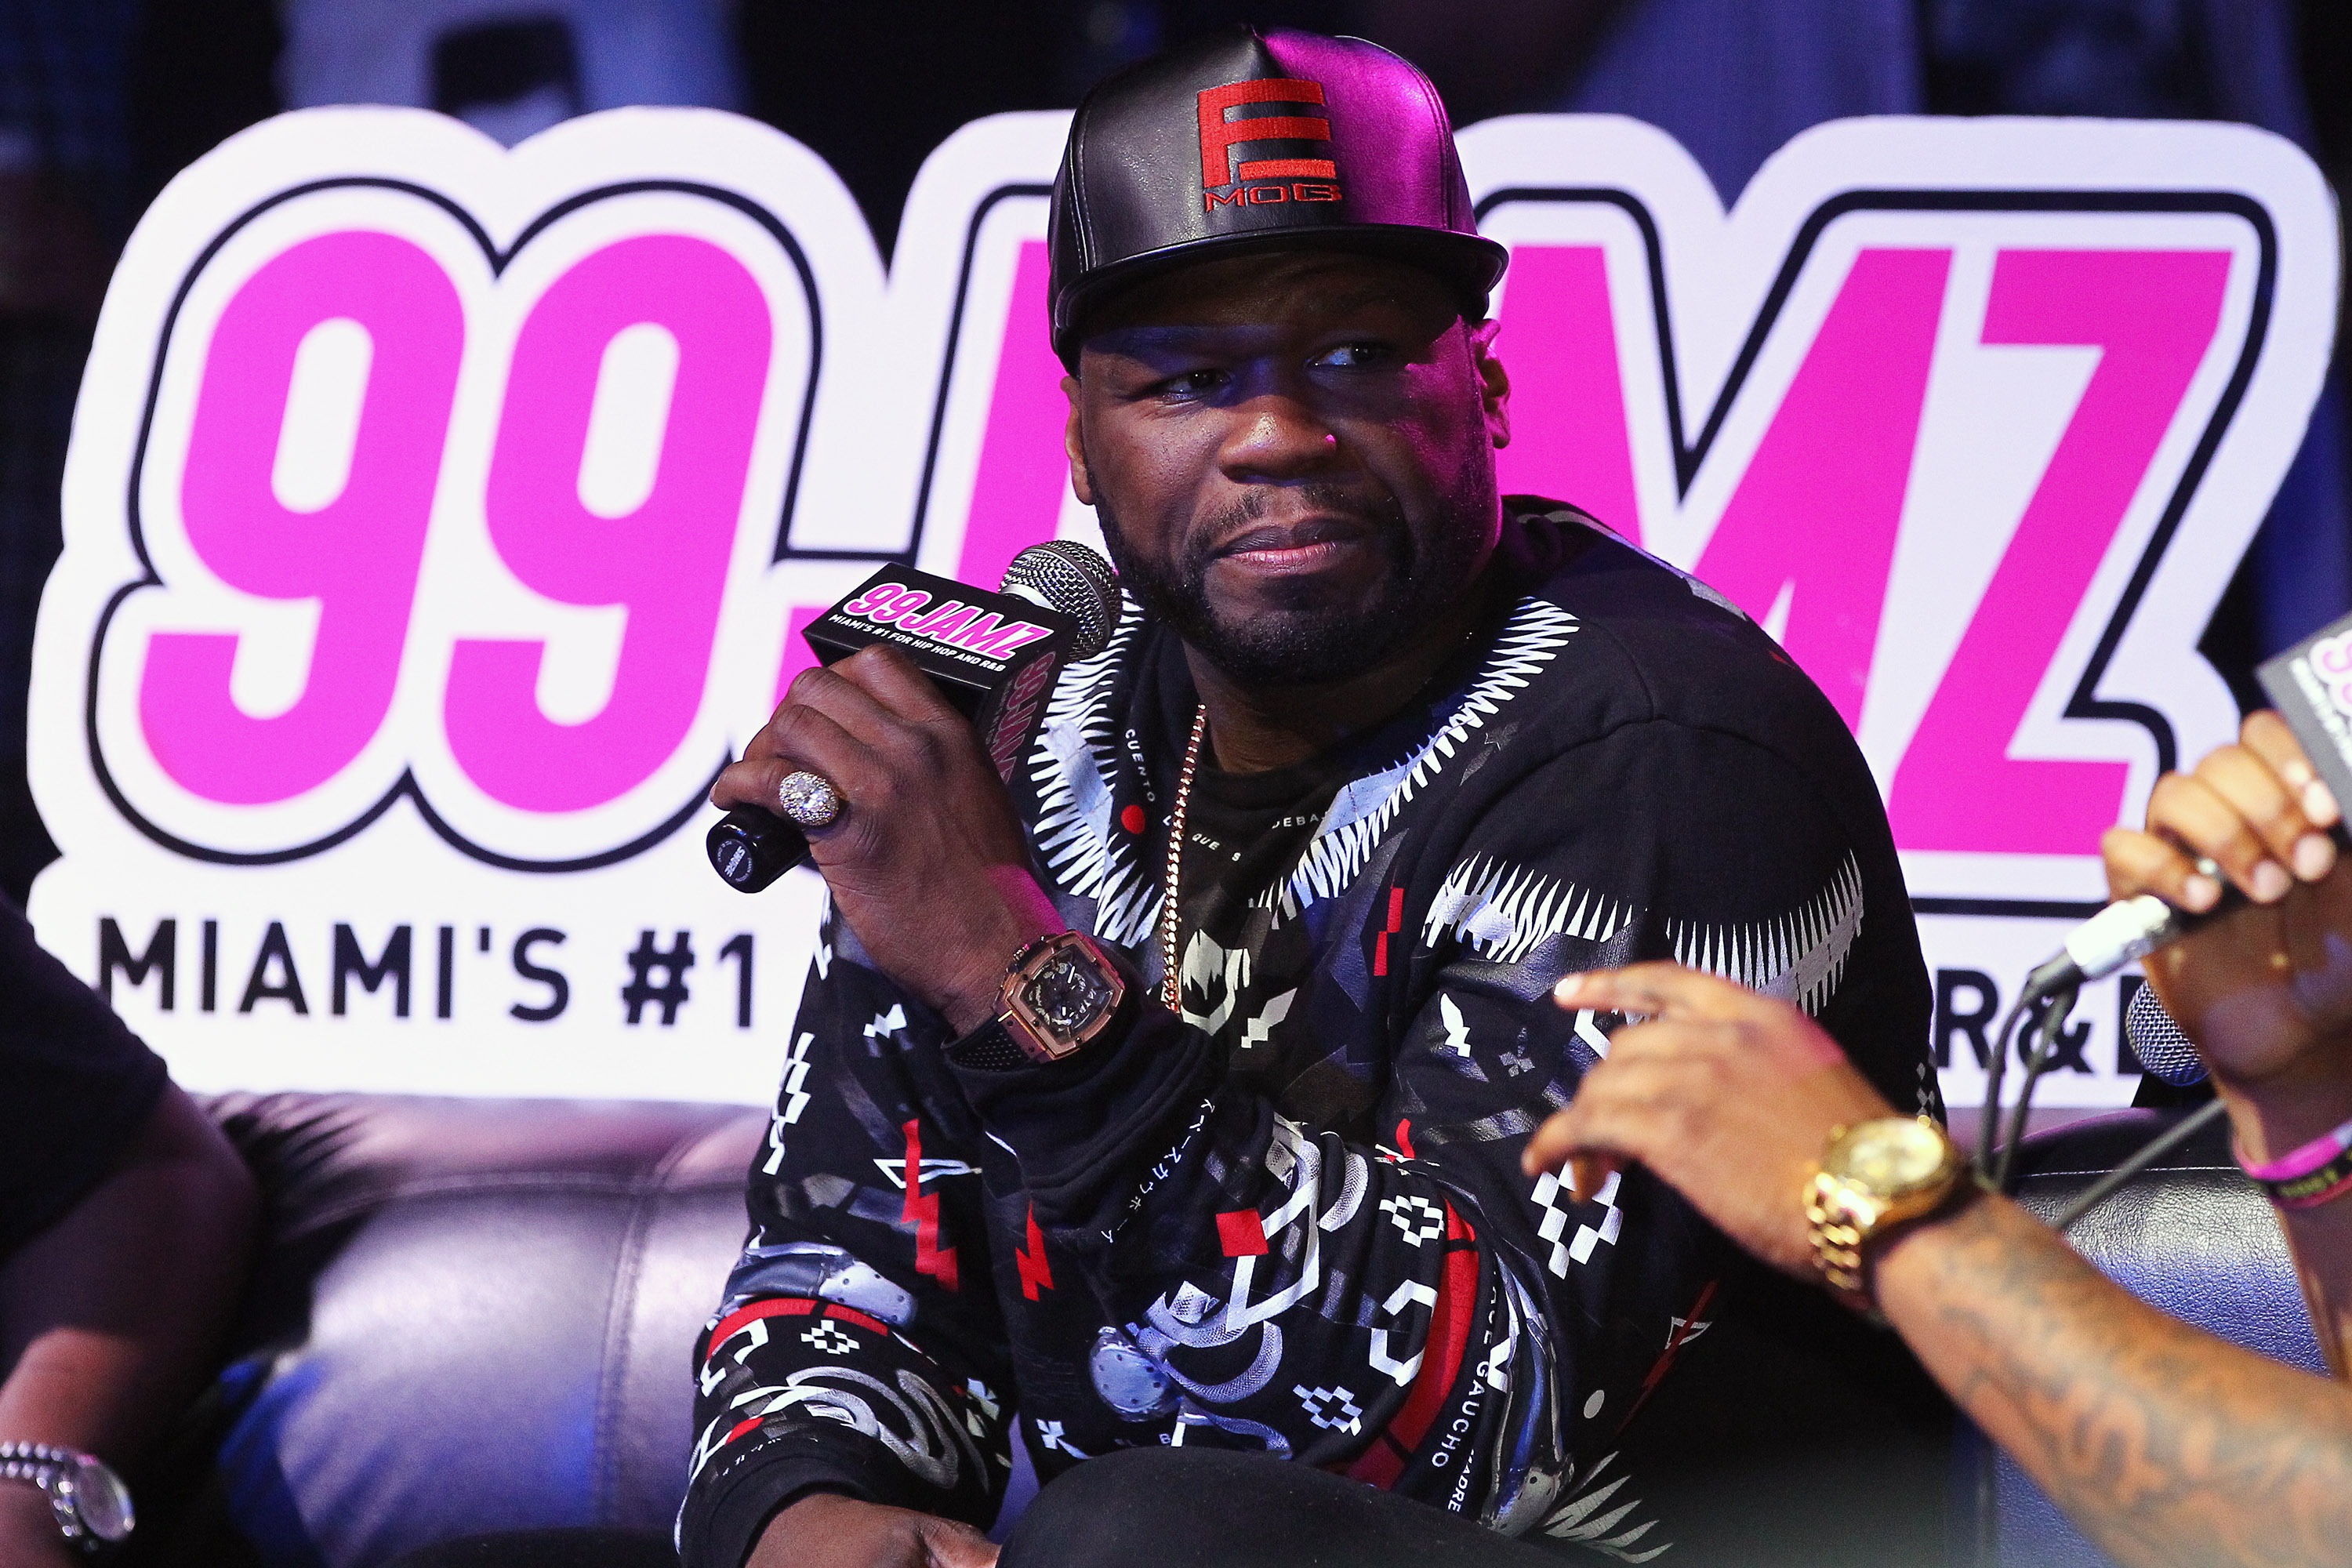 50 Cent answers questions from fans during 99 Jamz presents 50 Cent Uncensored at Revolution on March 25, 2016 in Fort Lauderdale, Florida. (Ralph Notaro&mdash;Getty Images)